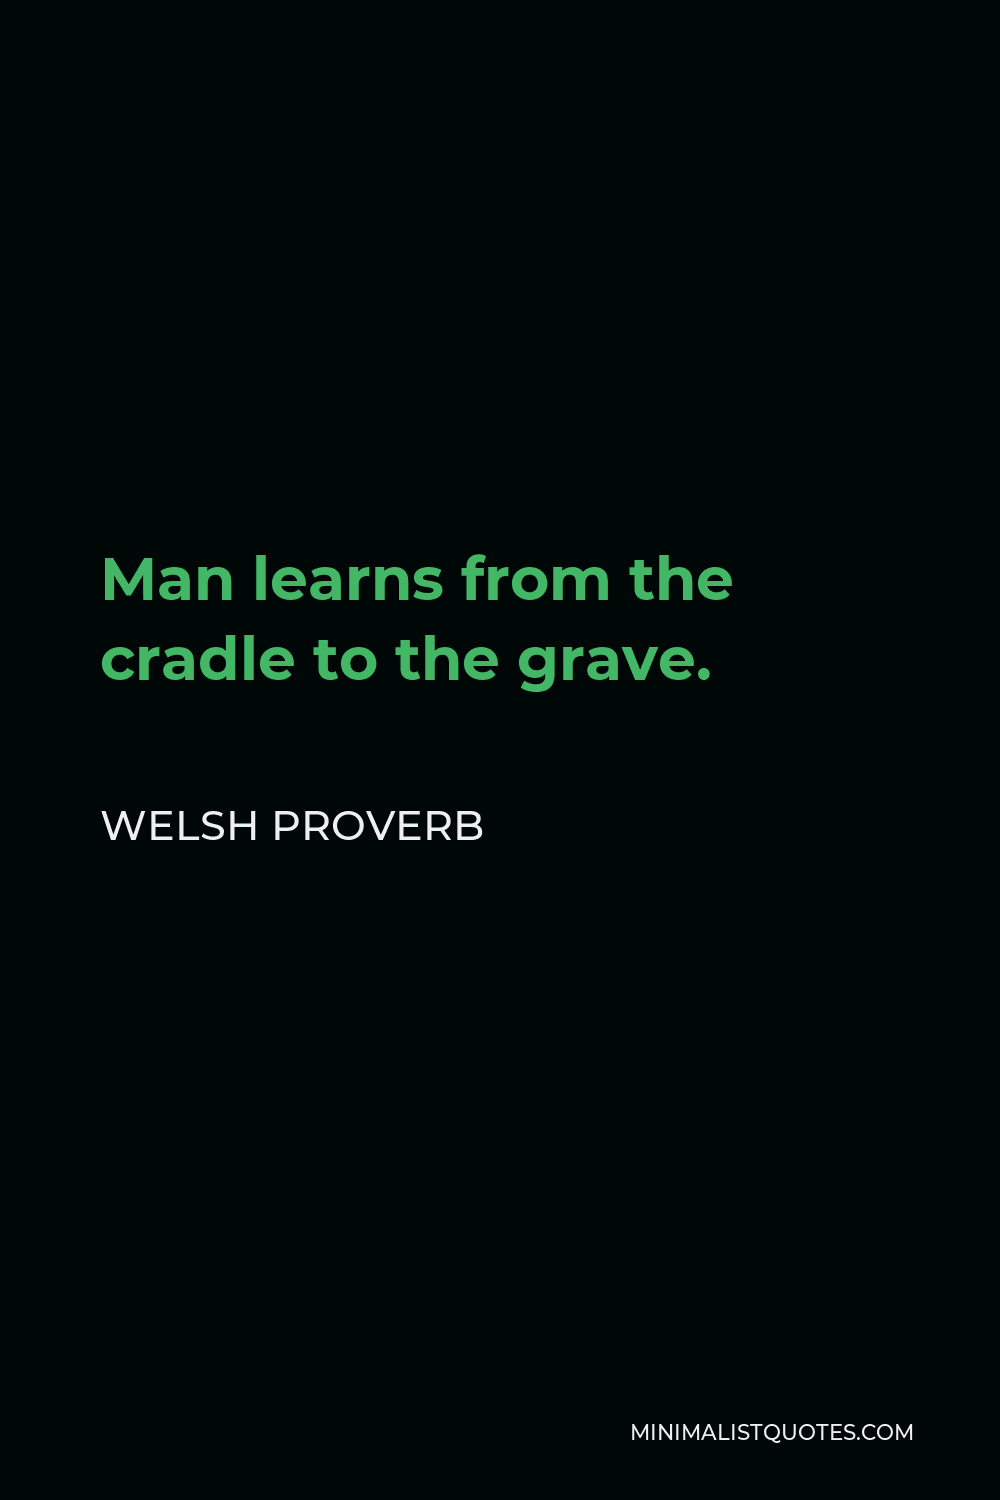 Welsh Proverb Quote - Man learns from the cradle to the grave.